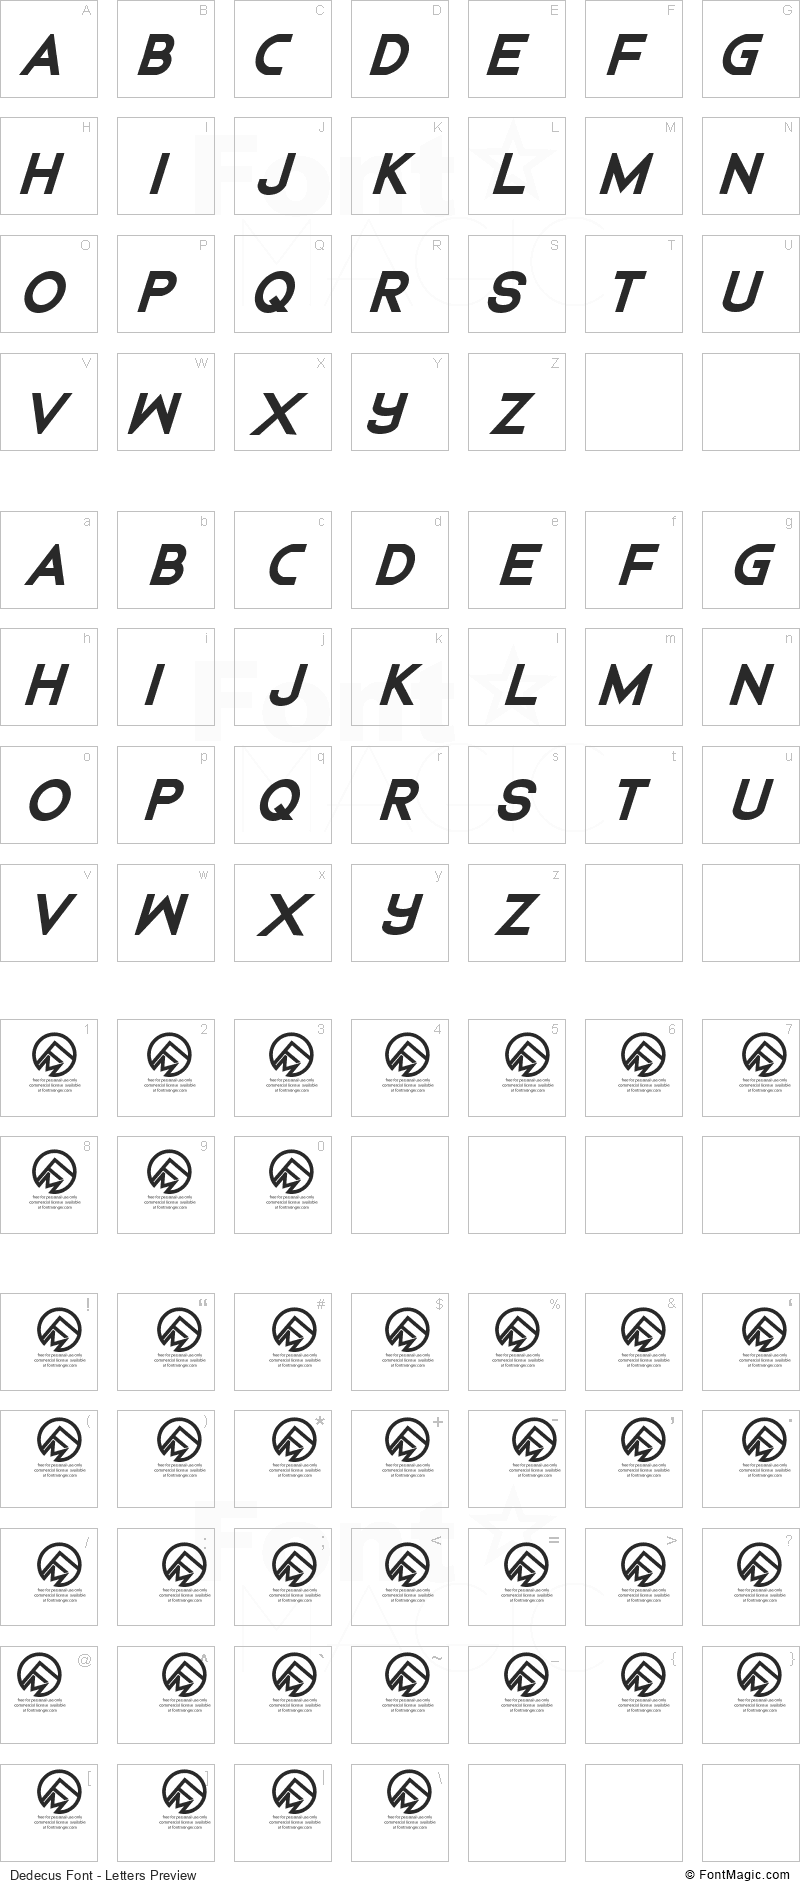 Dedecus Font - All Latters Preview Chart